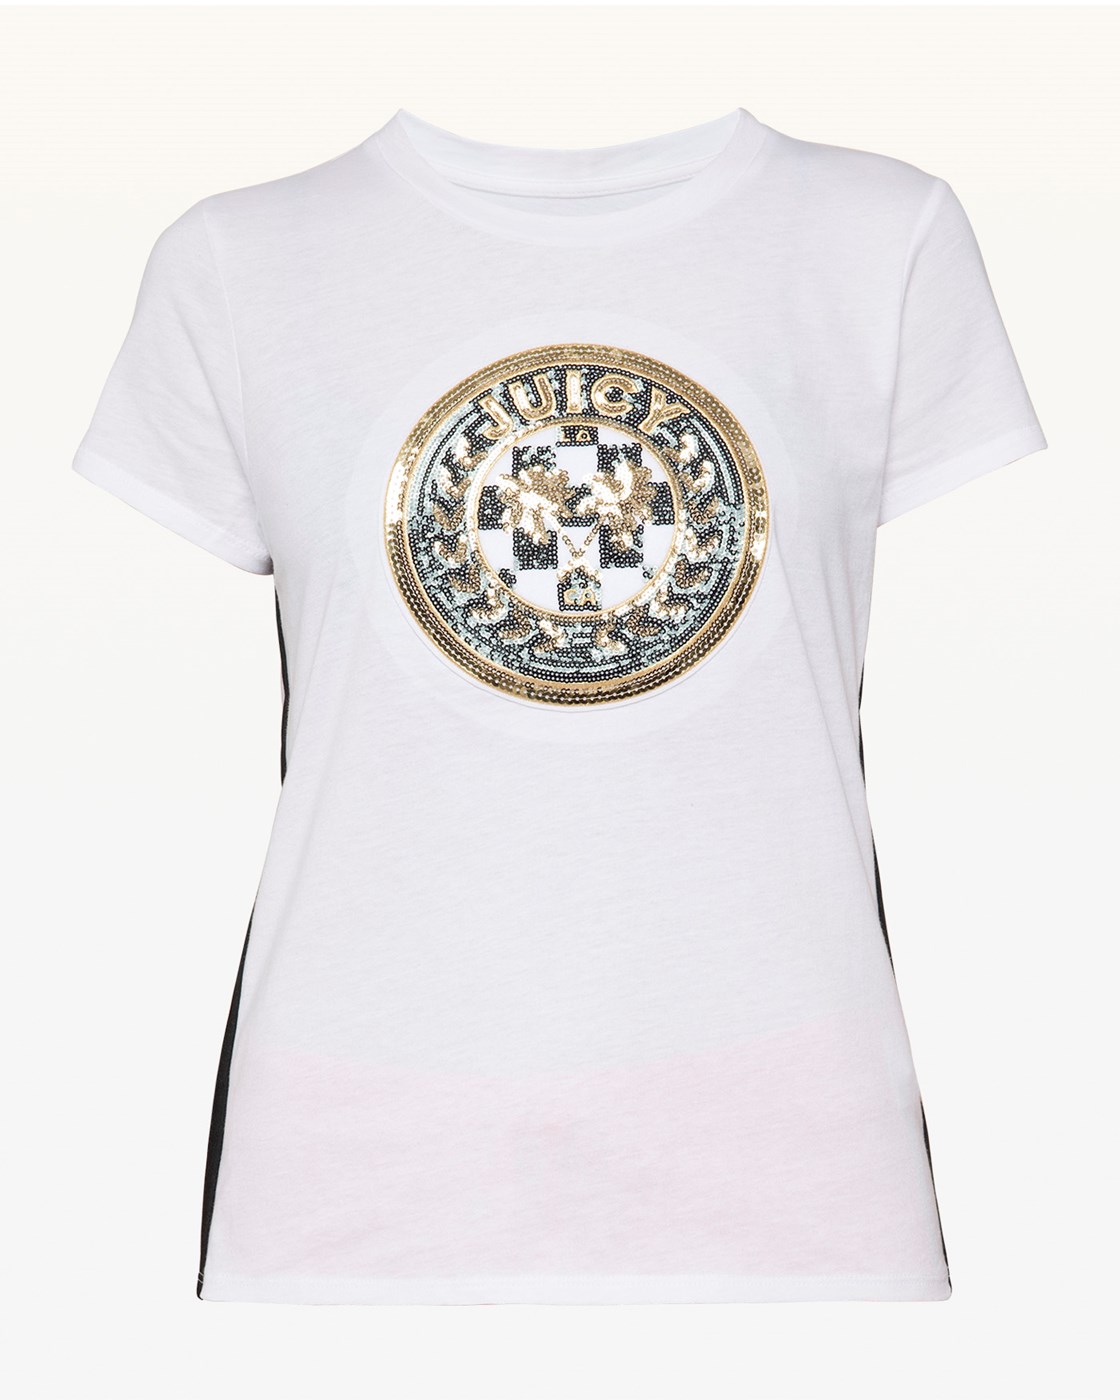 Juicy Couture Luxe Crest Patch Tee